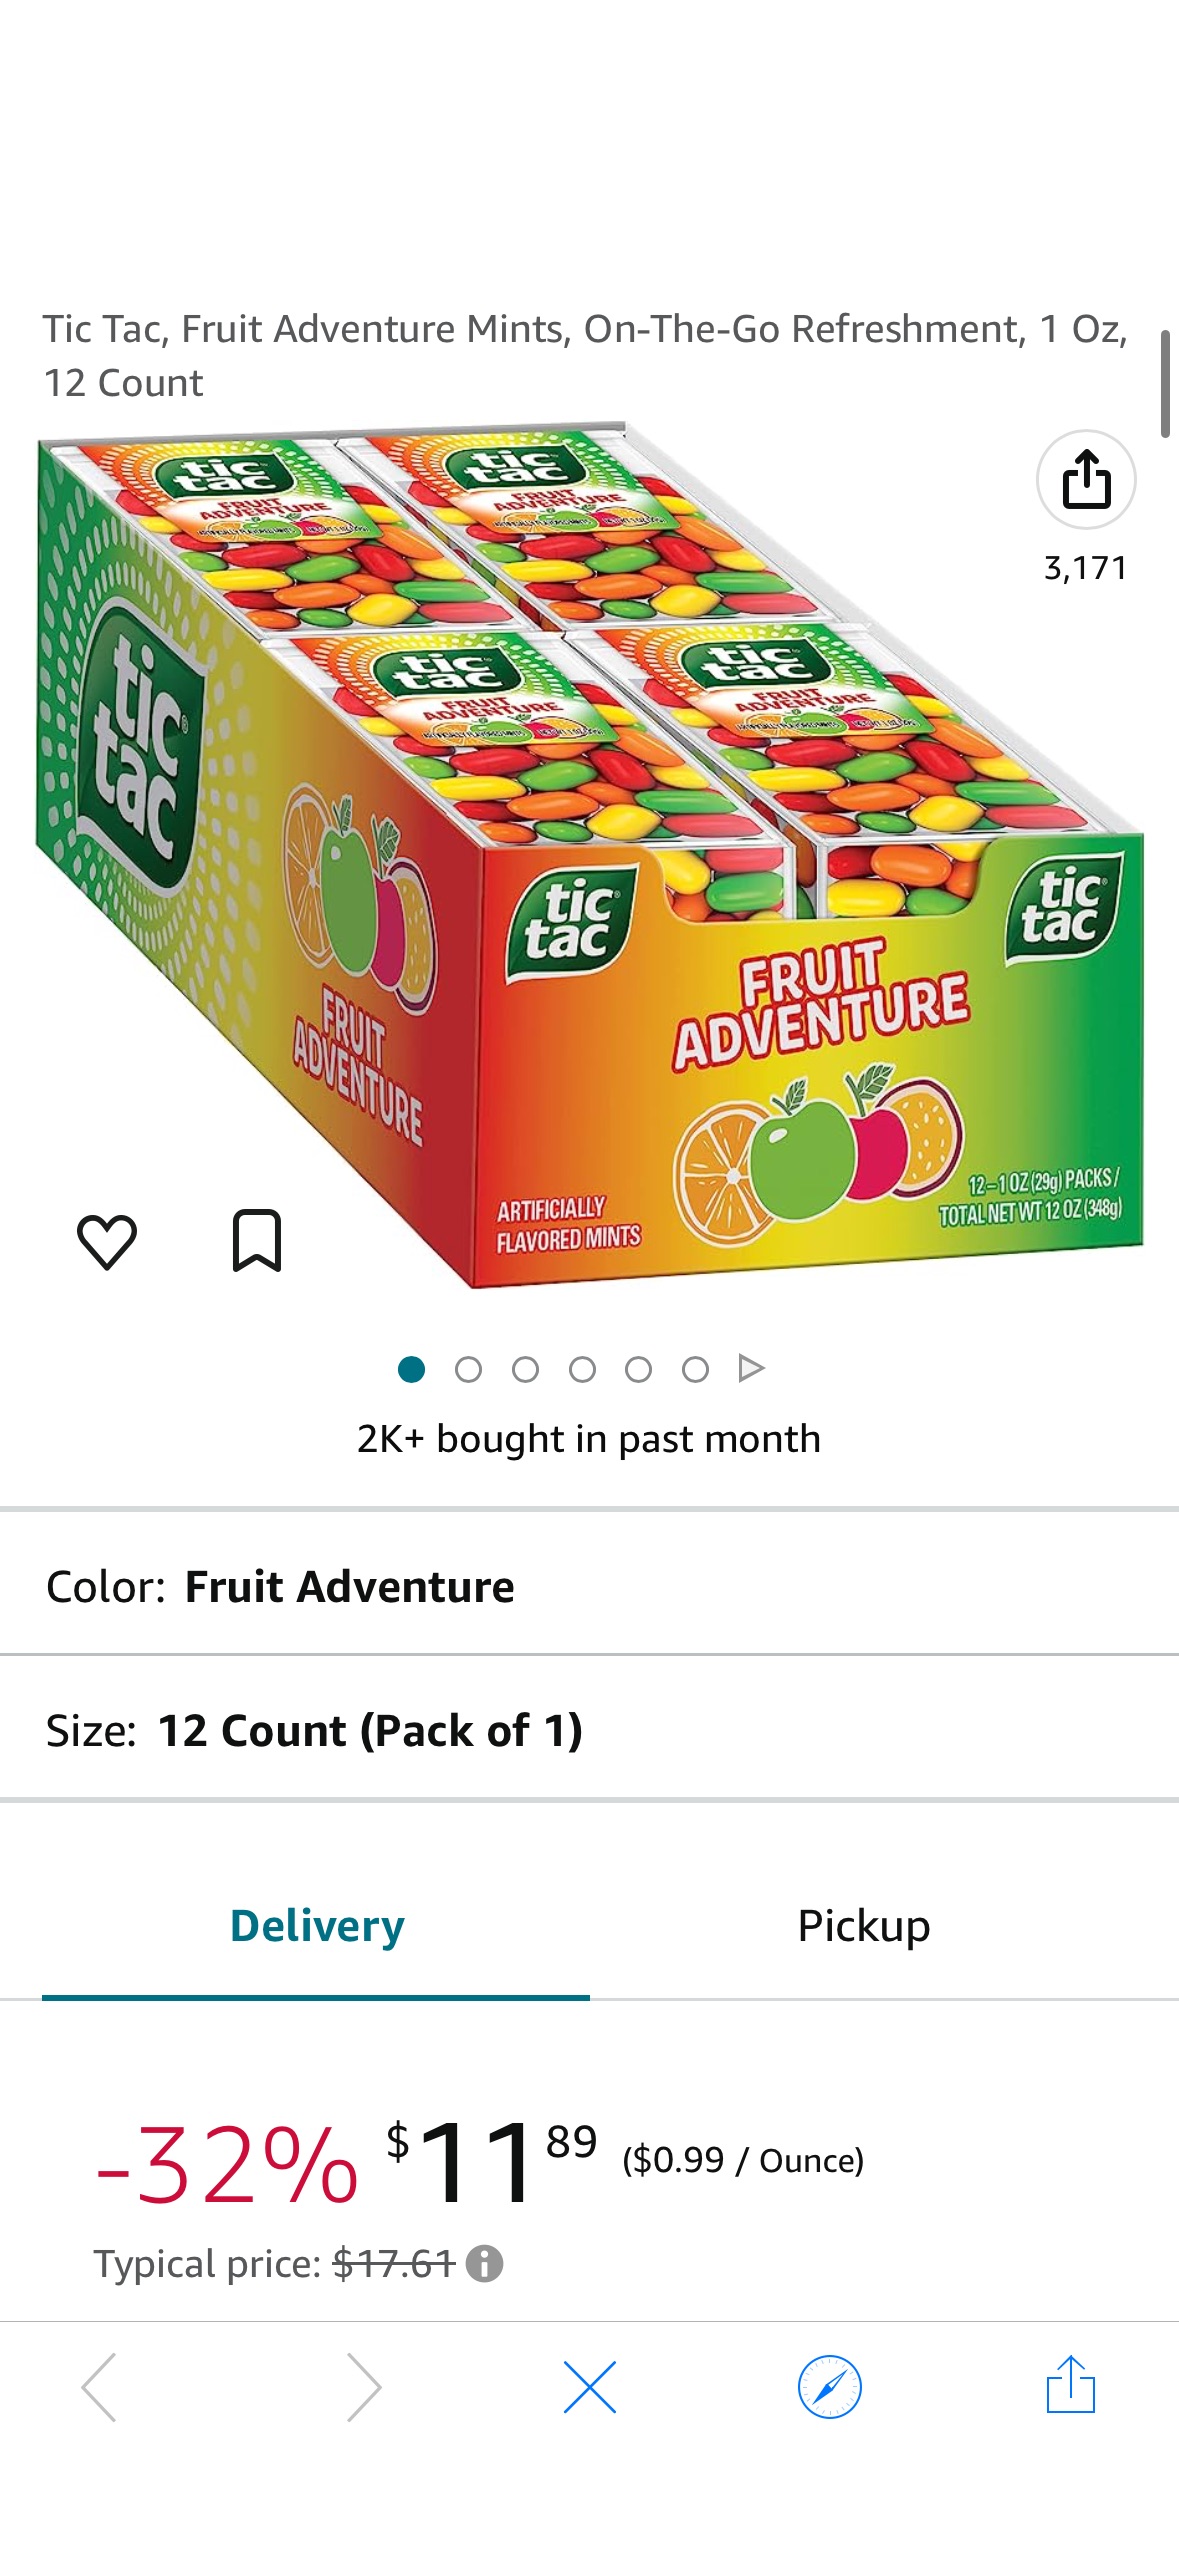 Amazon.com : Tic Tac, Fruit Adventure Mints, On-The-Go Refreshment, 1 Oz, 12 Count : Candy Mints : Grocery & Gourmet Food